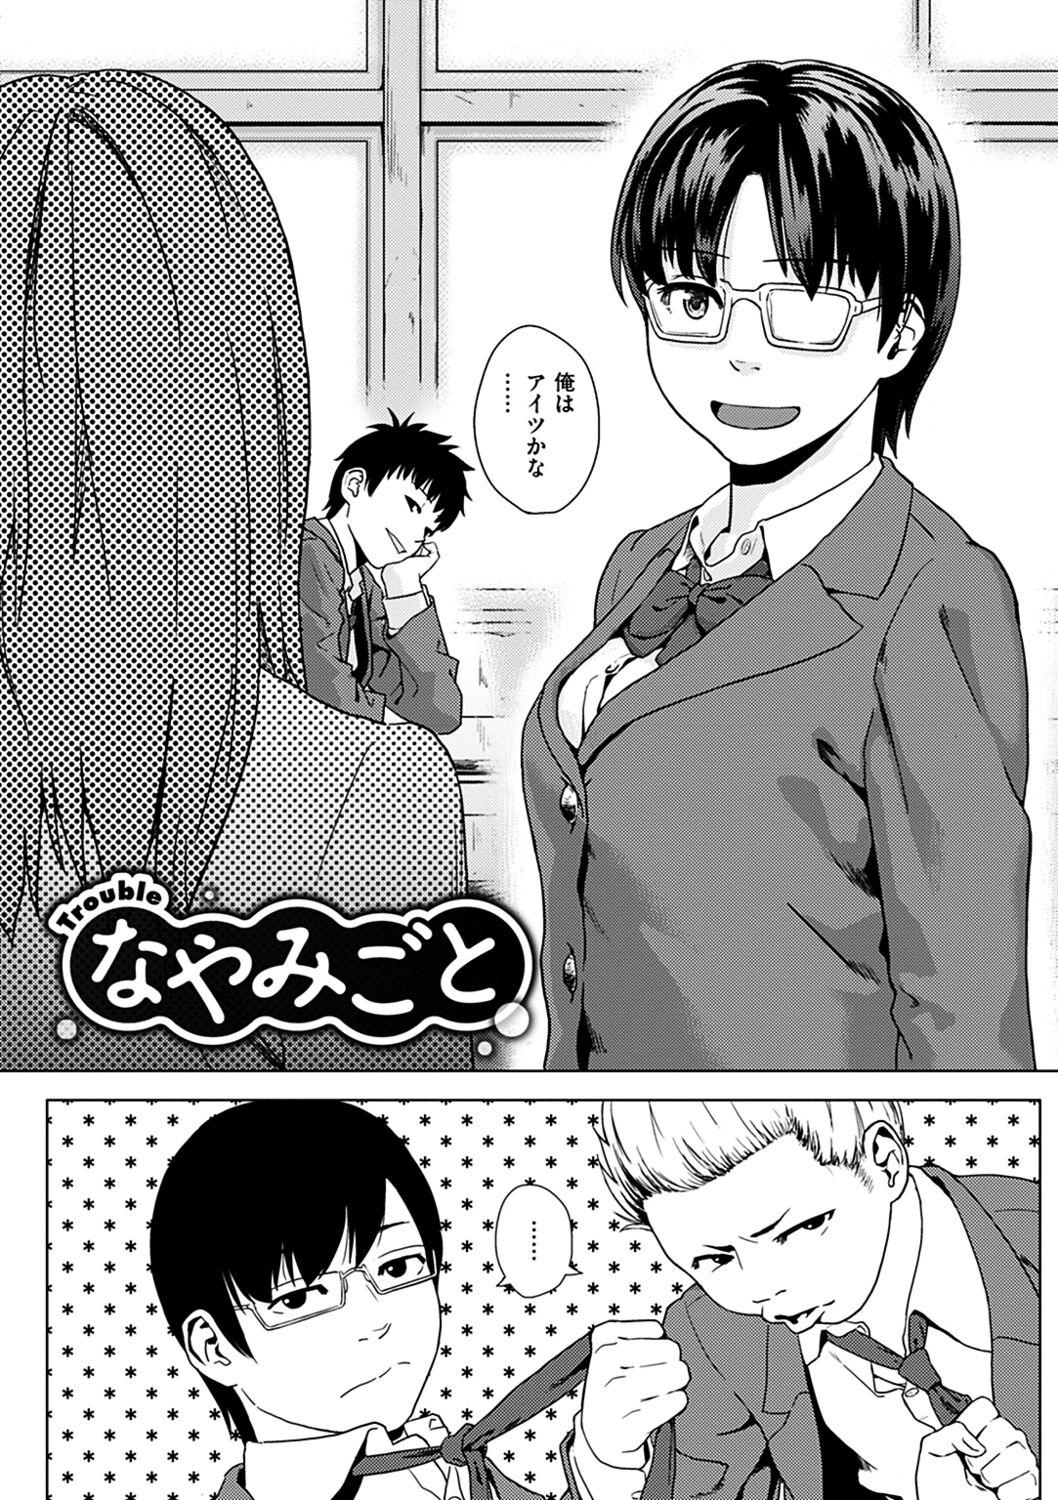 Speculum Kimi dake ni - I Only Love You... Ginger - Page 6